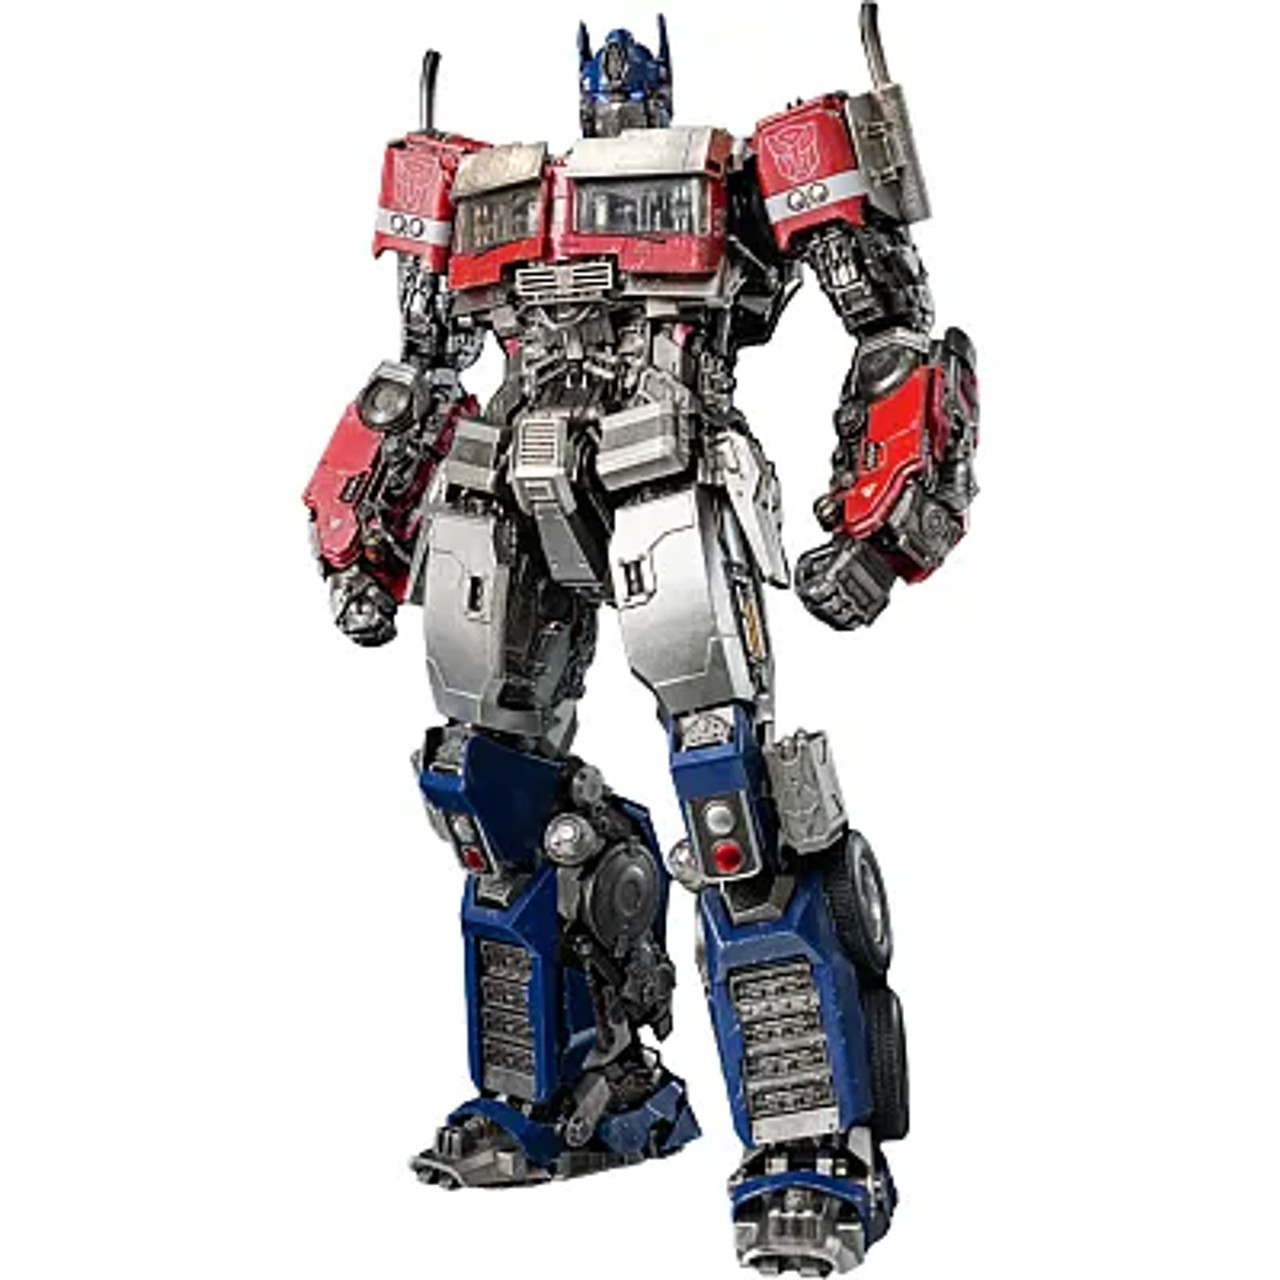 ThreeZero Transformers: Rise of the Beasts - DLX Scale BUMBLEBEE